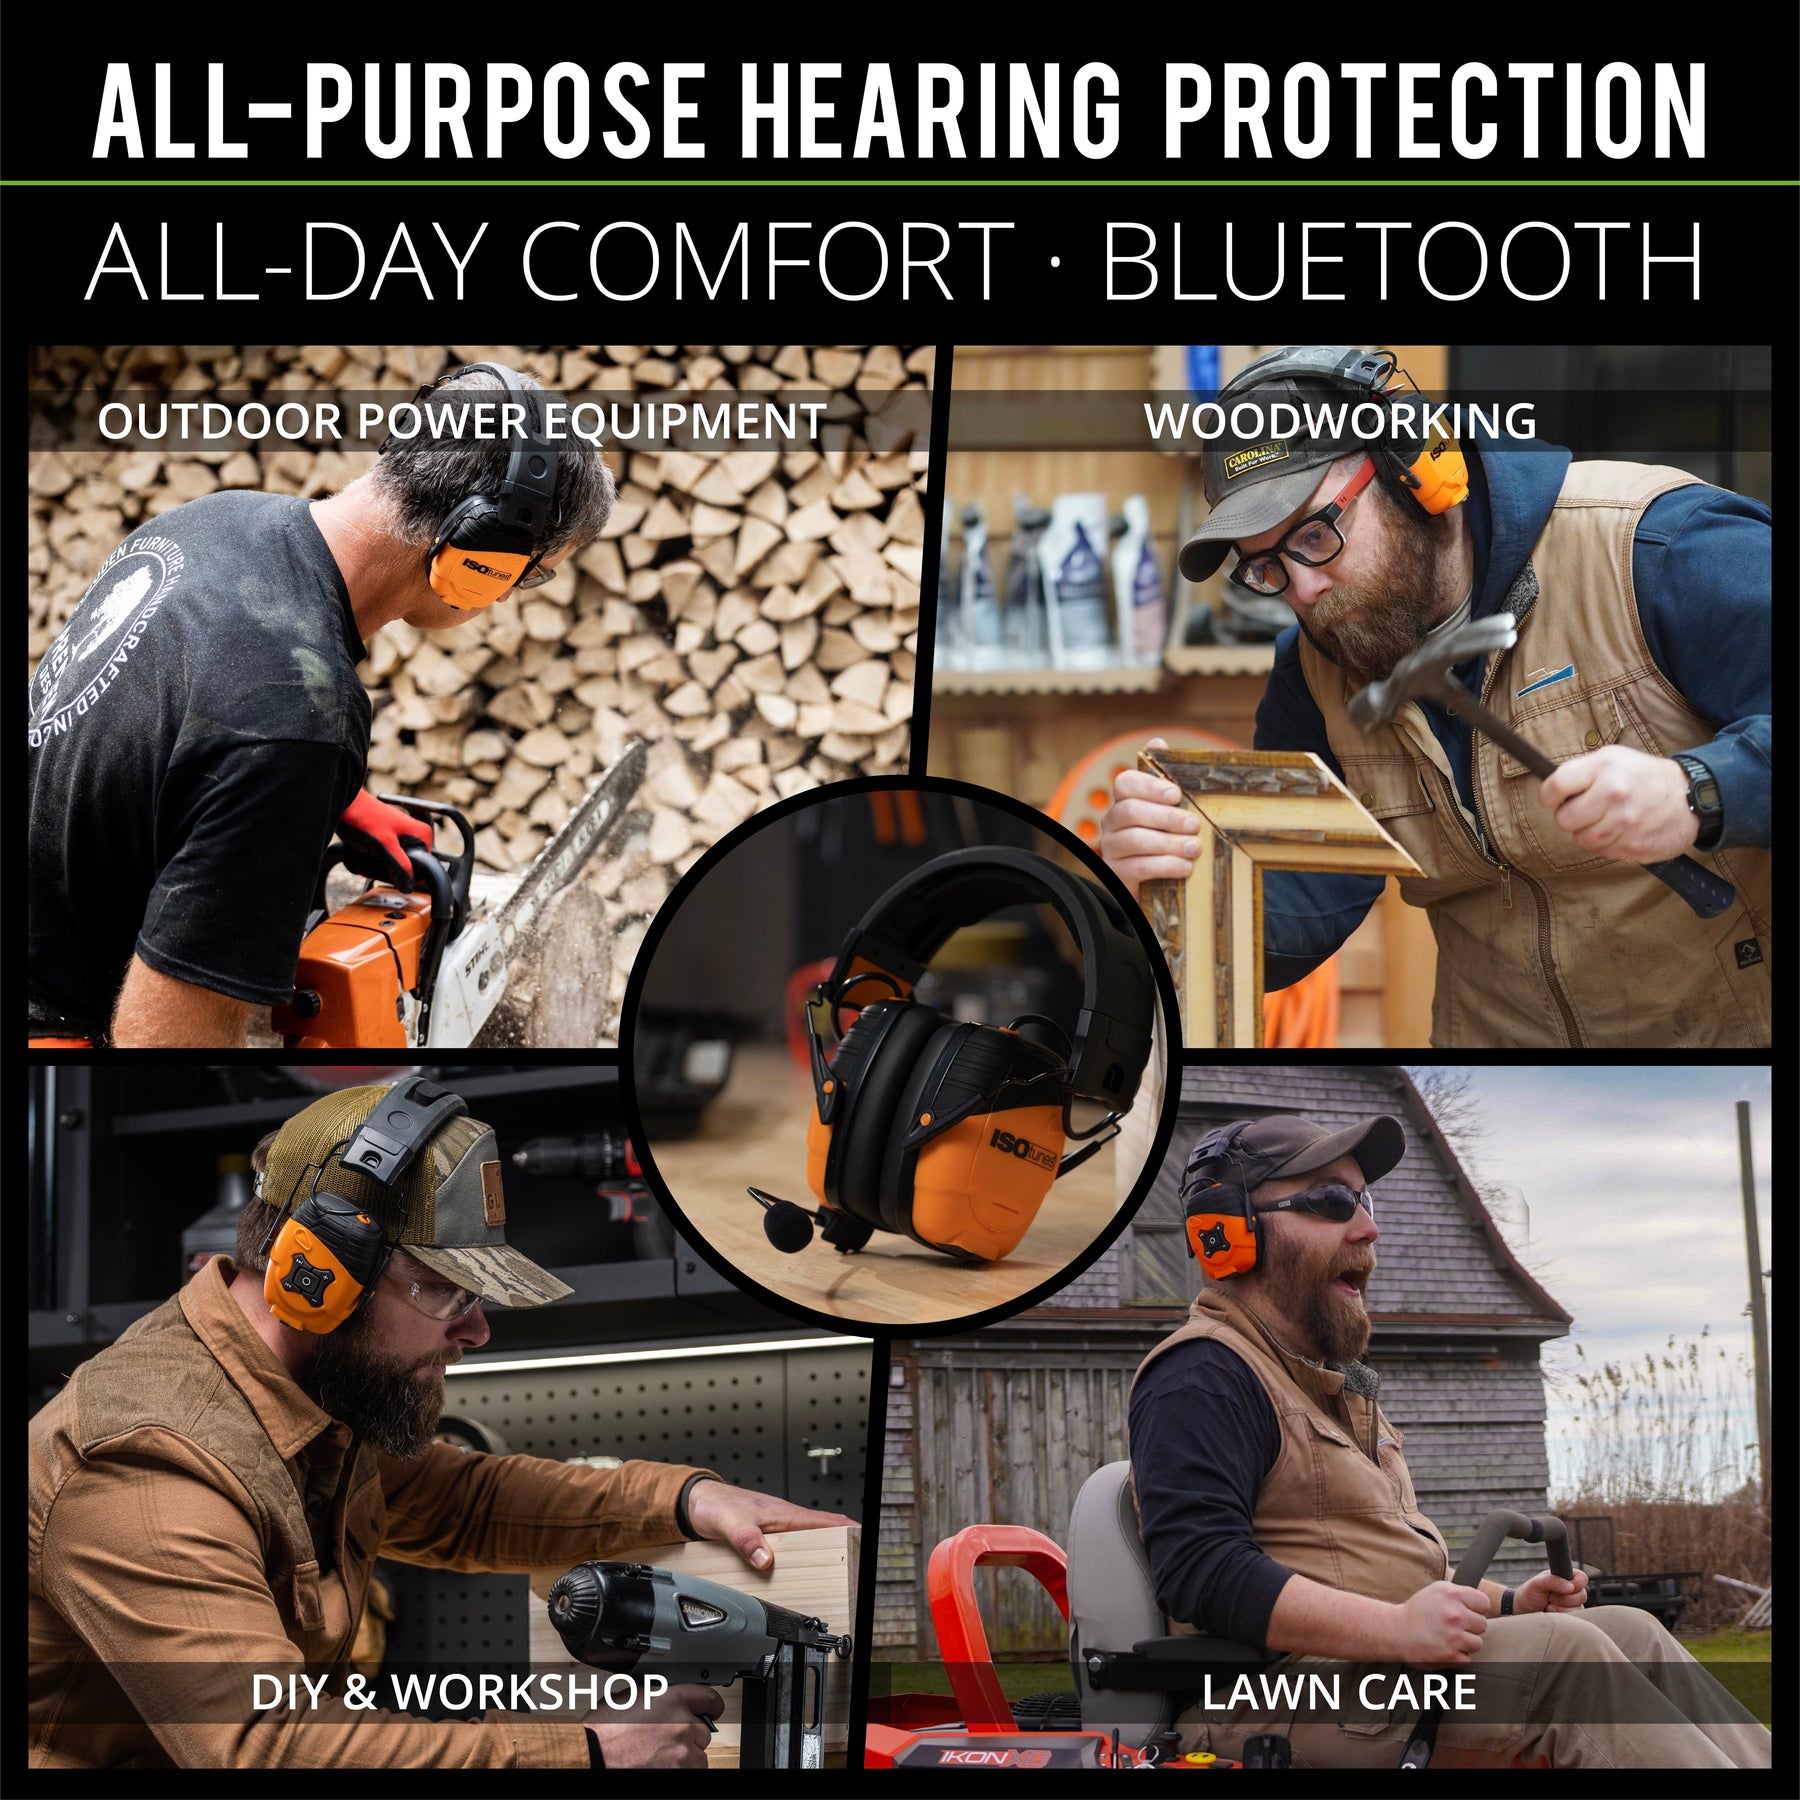 ISOtunes LINK 2 All-Purpose Hearing Protection with All-Day Comfort and Bluetooth